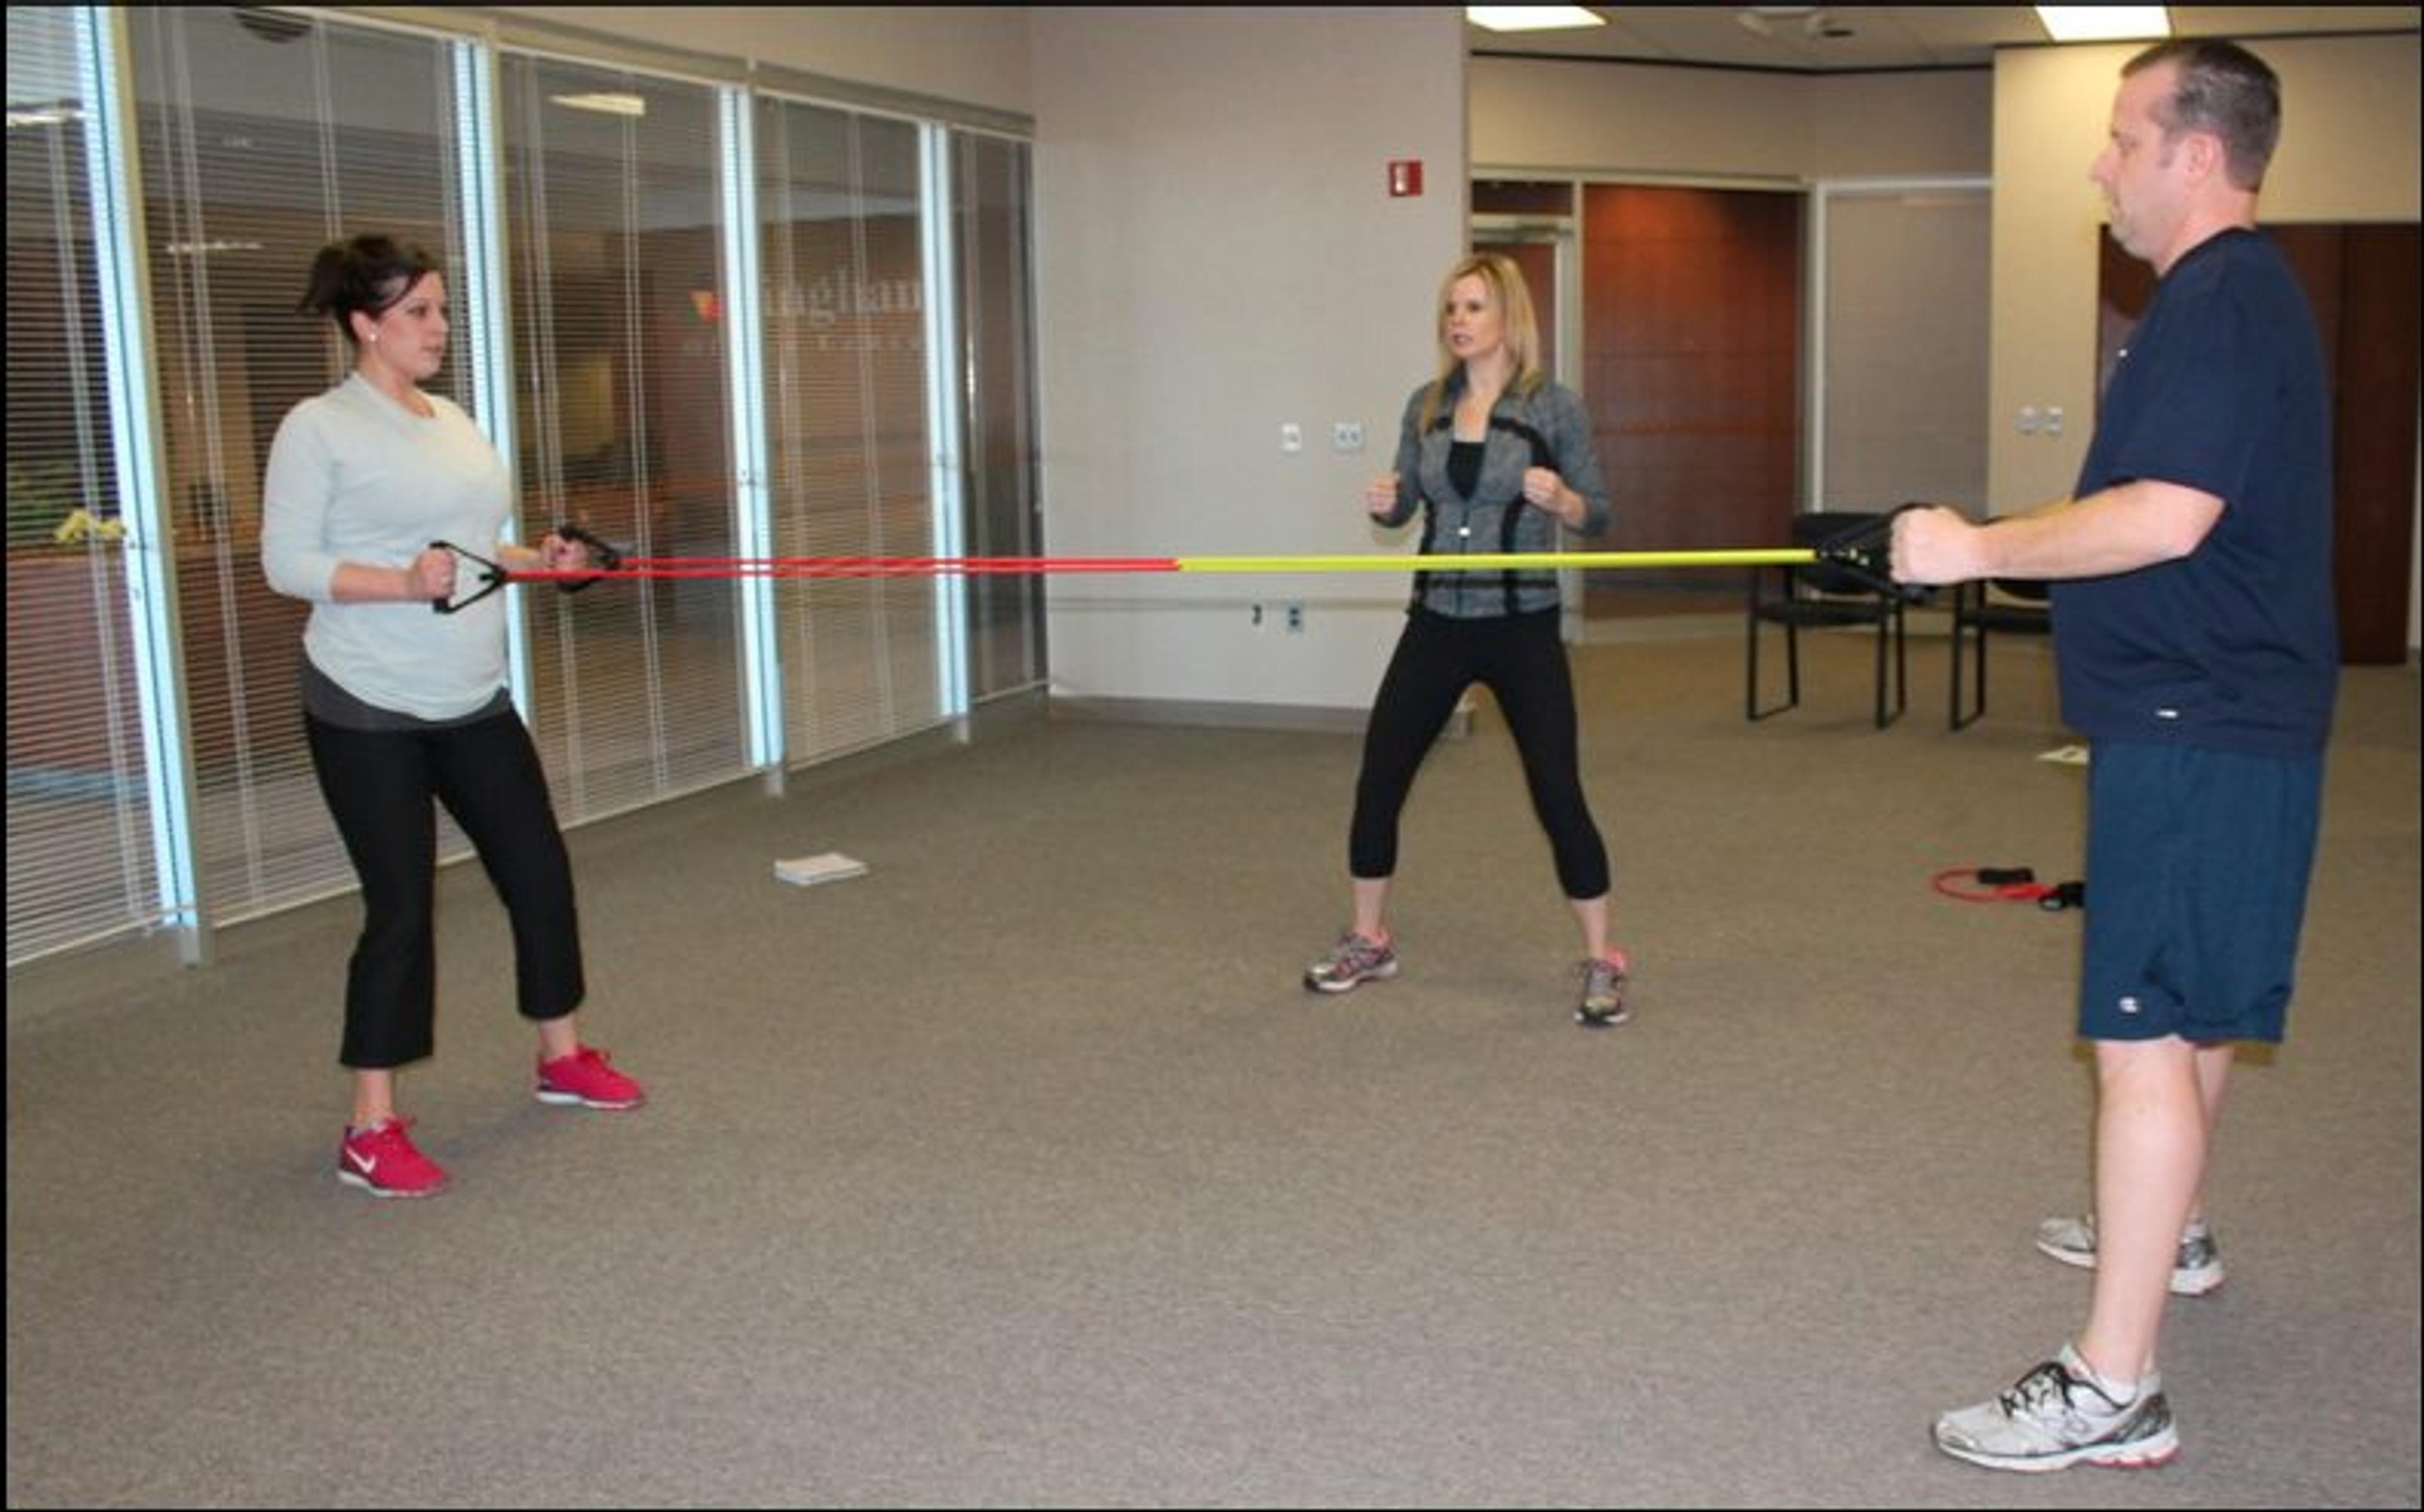 Jennifer Cooper, trainer and owner of Healthy 4 Life, focuses on movements that target multiple muscle groups during Farbman Group's fitness program at Bingham Center in Bingham Farms, MI. 